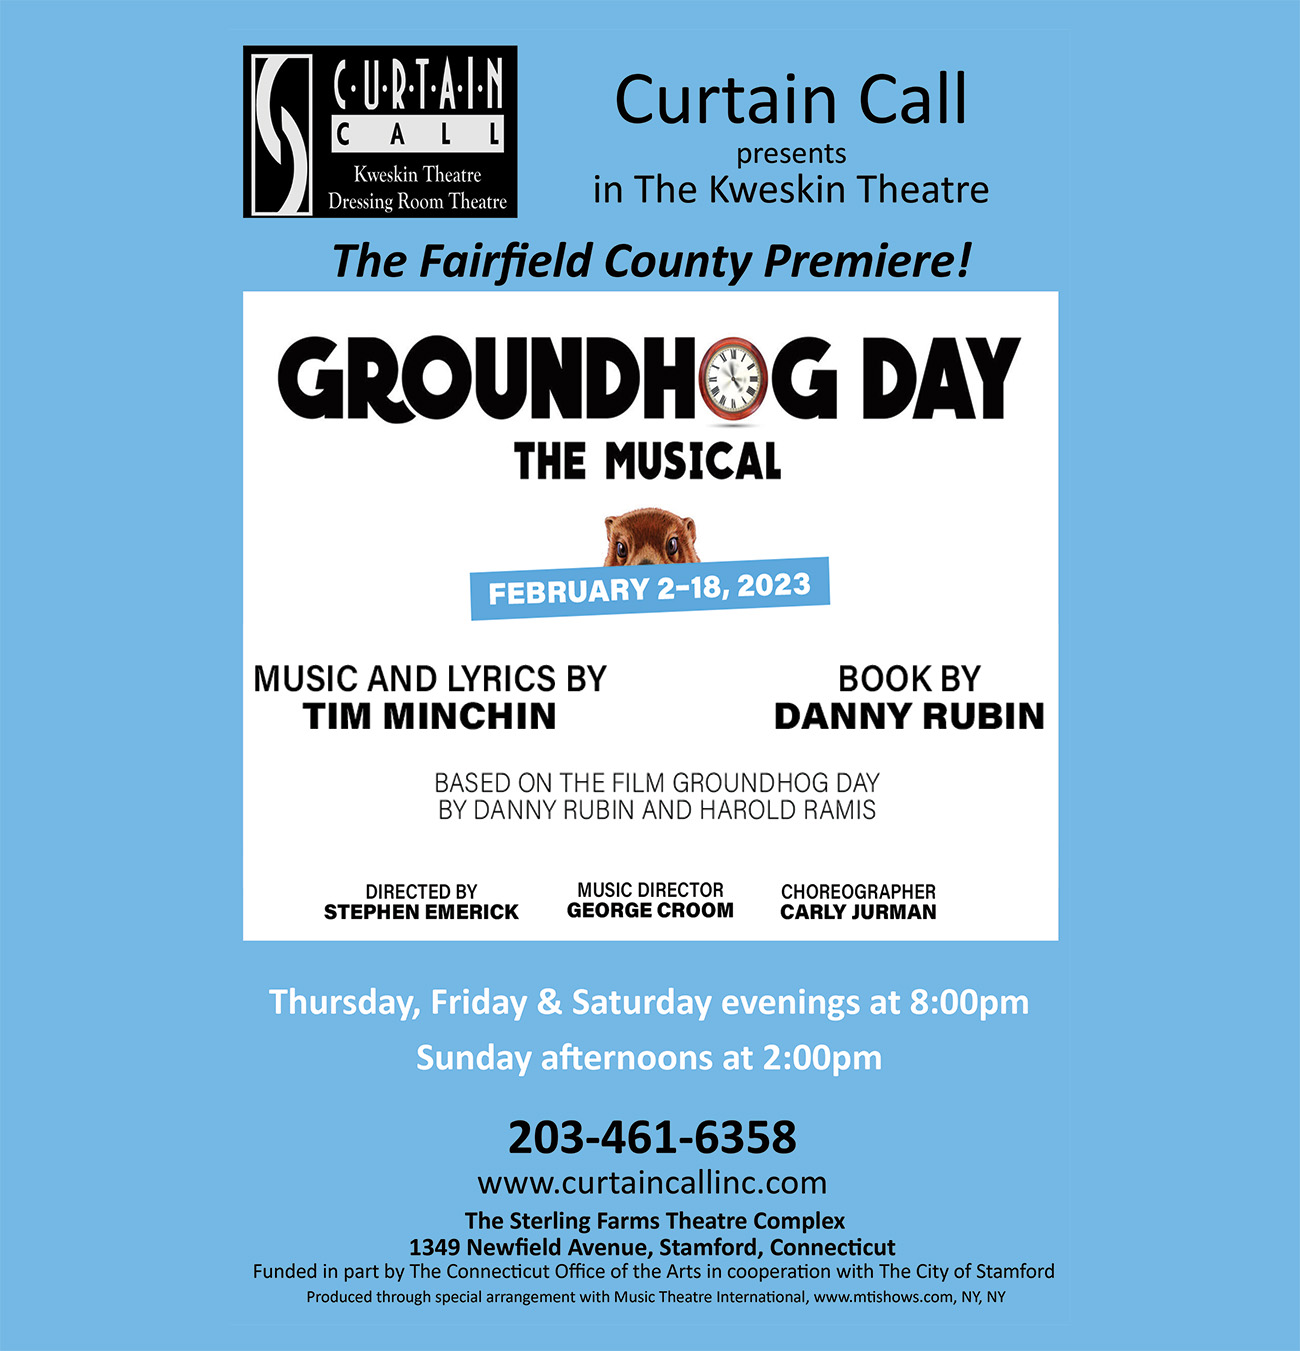 Image for GROUNDHOG DAY, The Musical